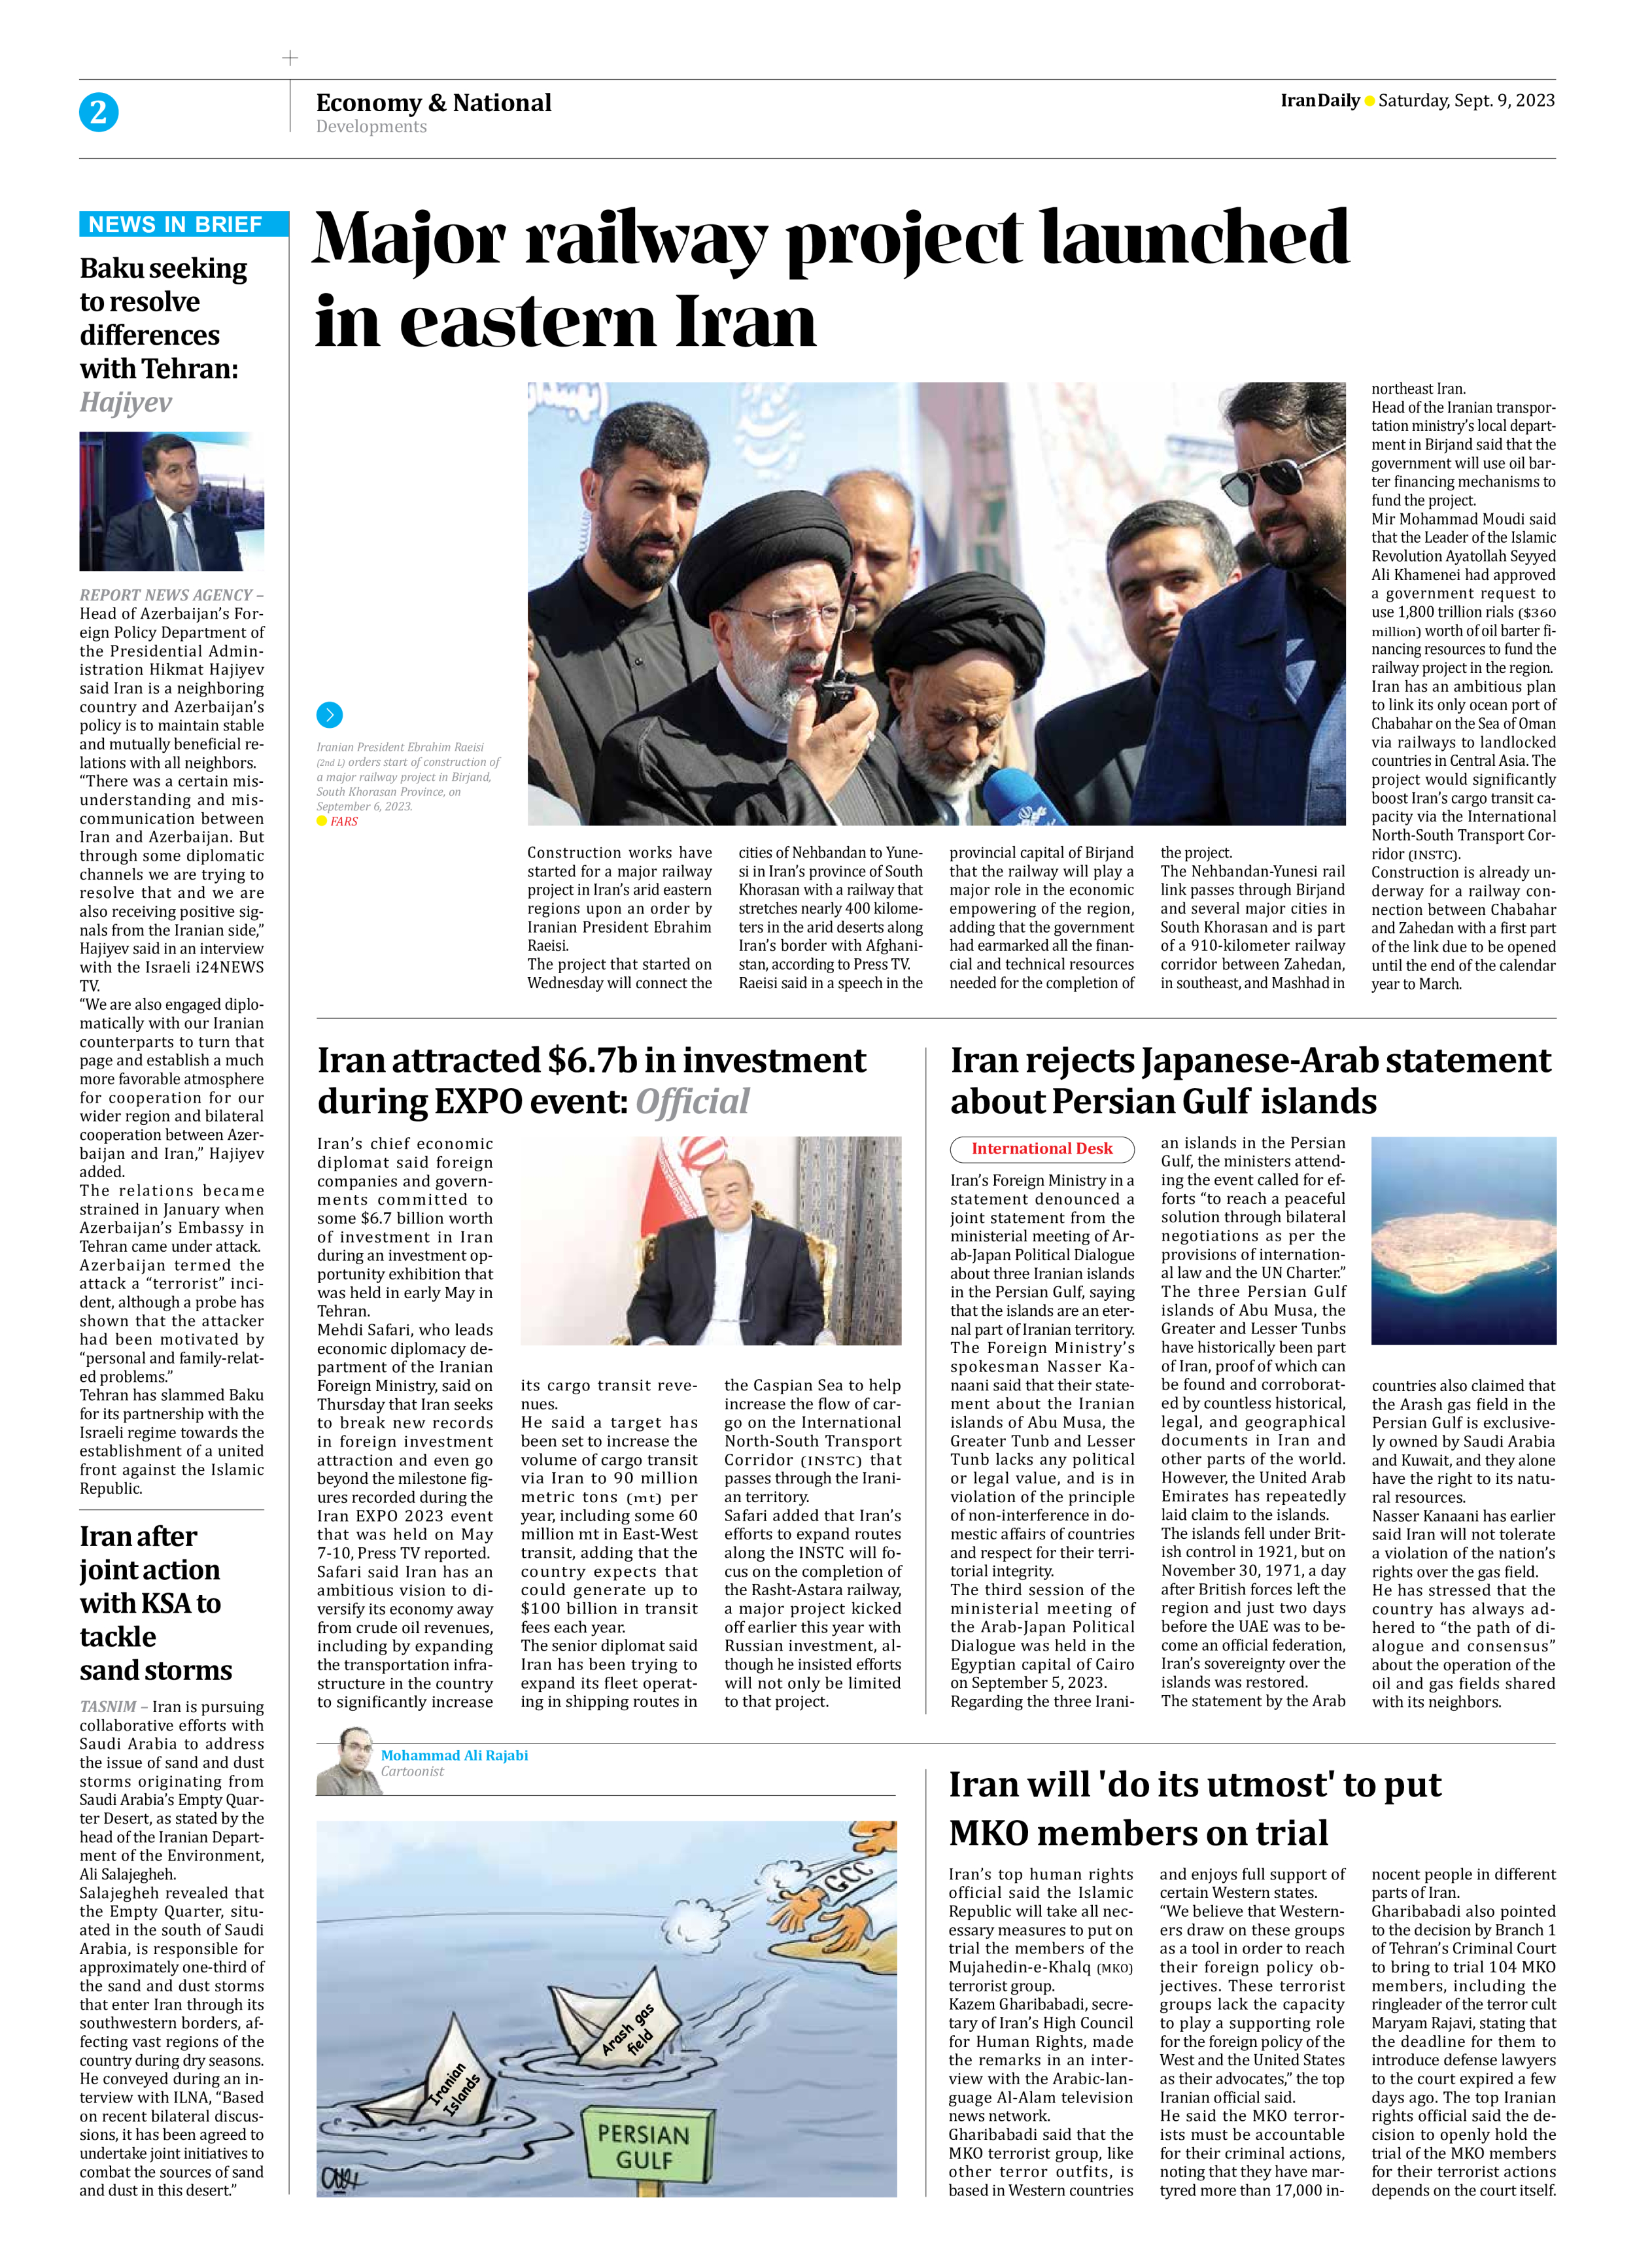 Iran Daily - Number Seven Thousand Three Hundred and Eighty Two - 09 September 2023 - Page 2